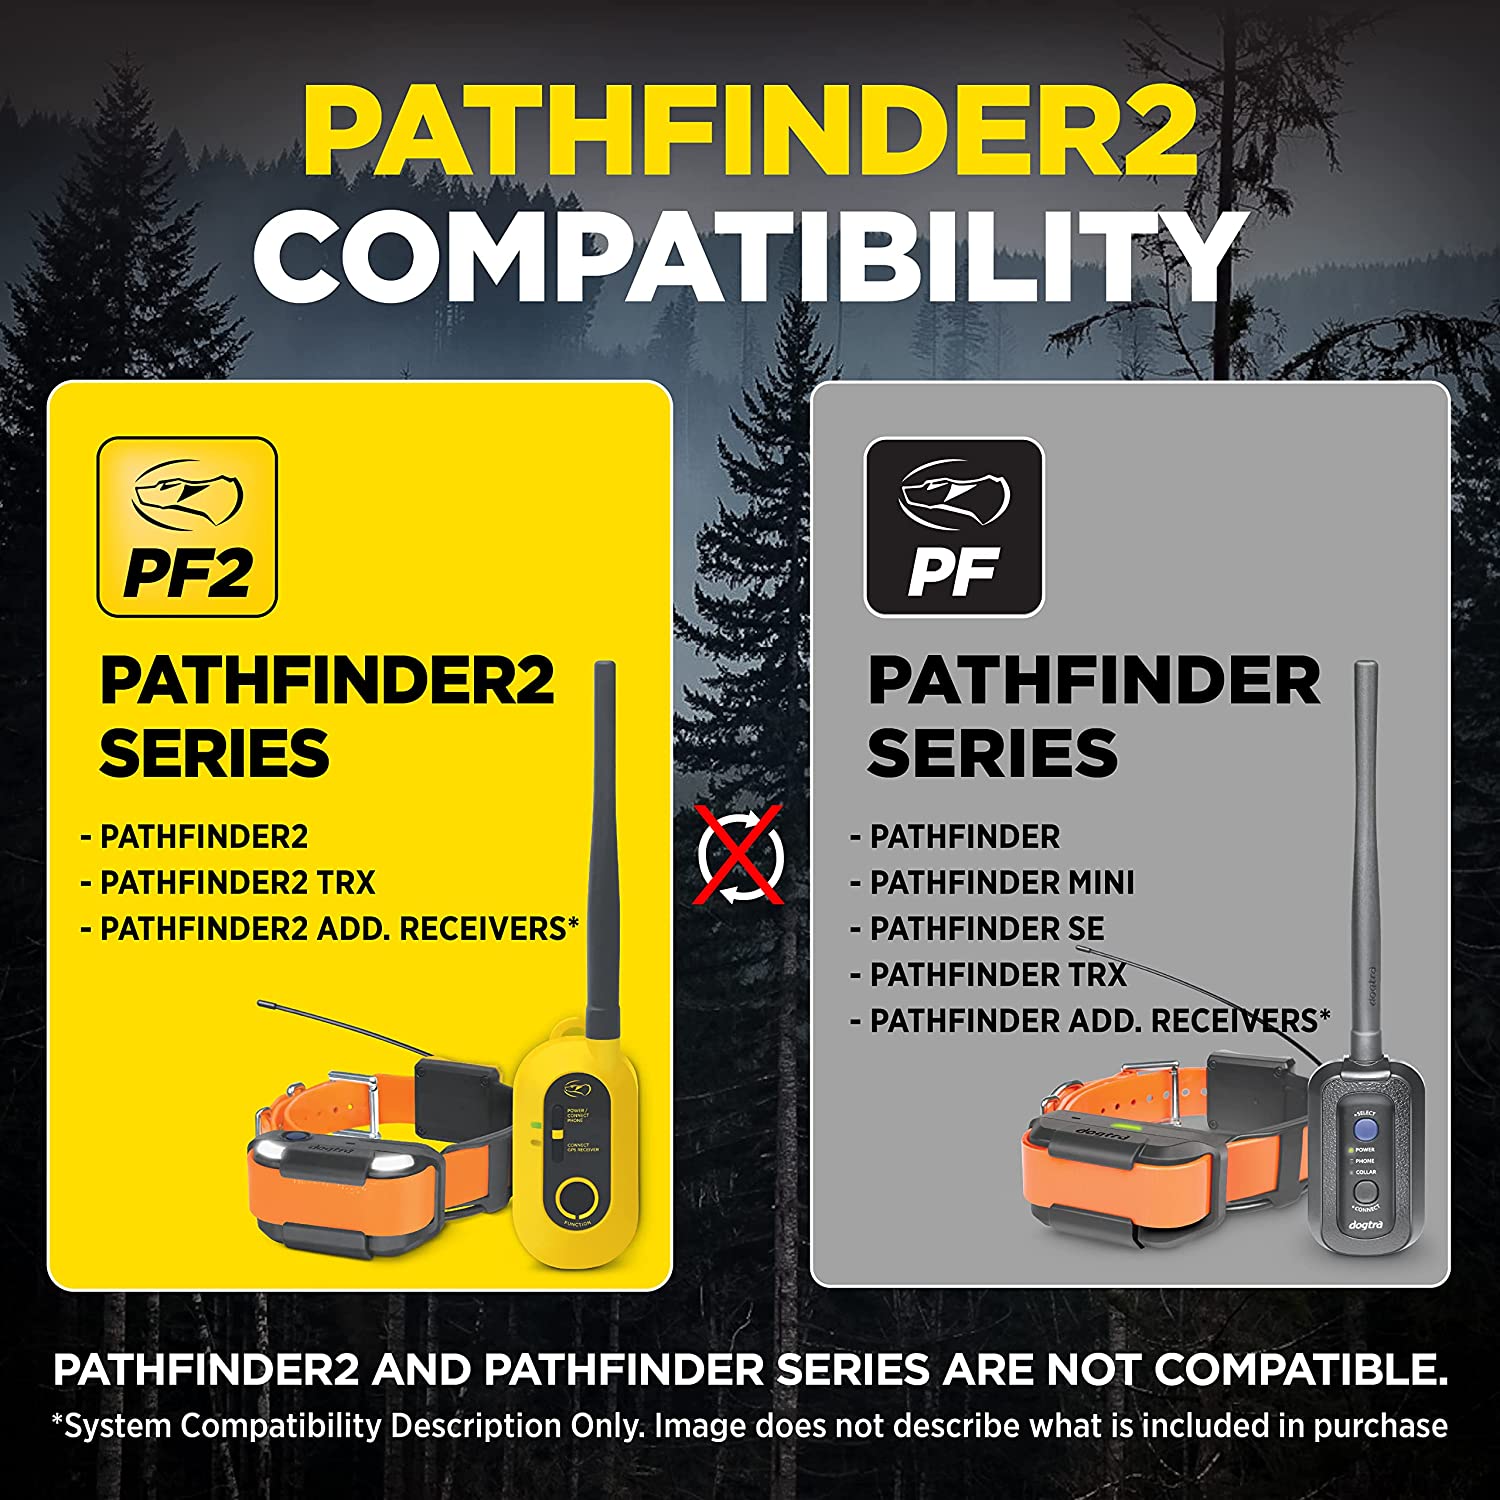 Dogtra Pathfinder TRX Additional Receiver 9-Mile 21-Dog Expandable Waterproof Smartphone GPS-Only Tracking Collar with 2-Second Update Rate, No Subscription Fee, Free Satellite Map